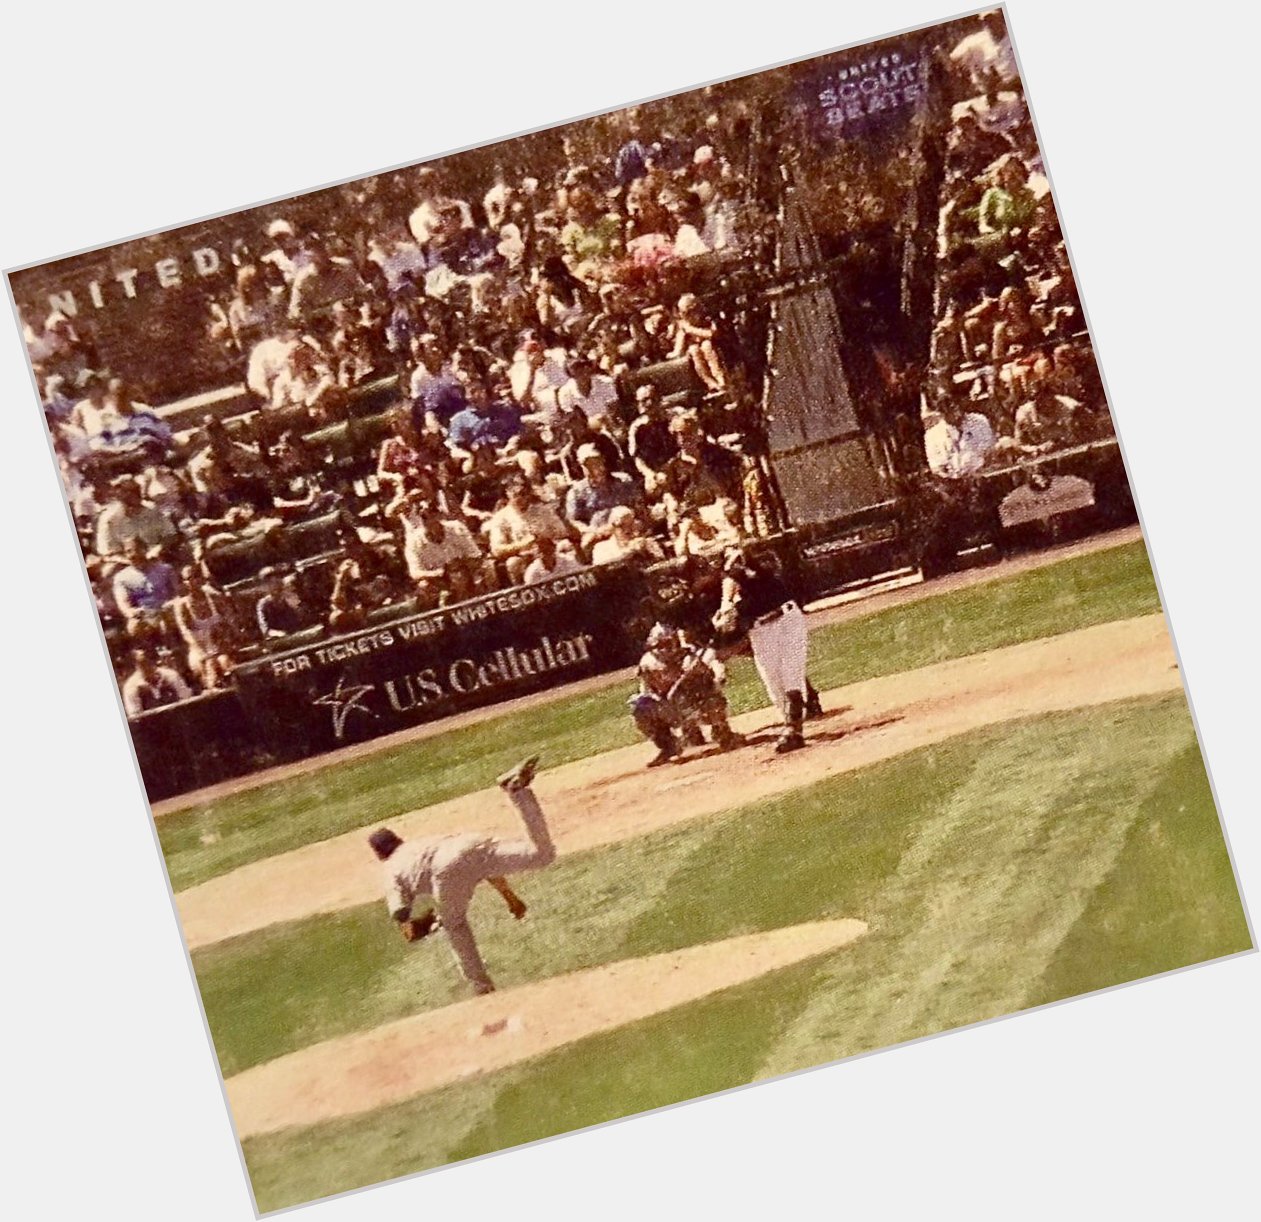 Happy 42nd birthday to Paul Konerko! Here he is crushing a Ryan Dempster offering for a home run. (My photo, 2010) 